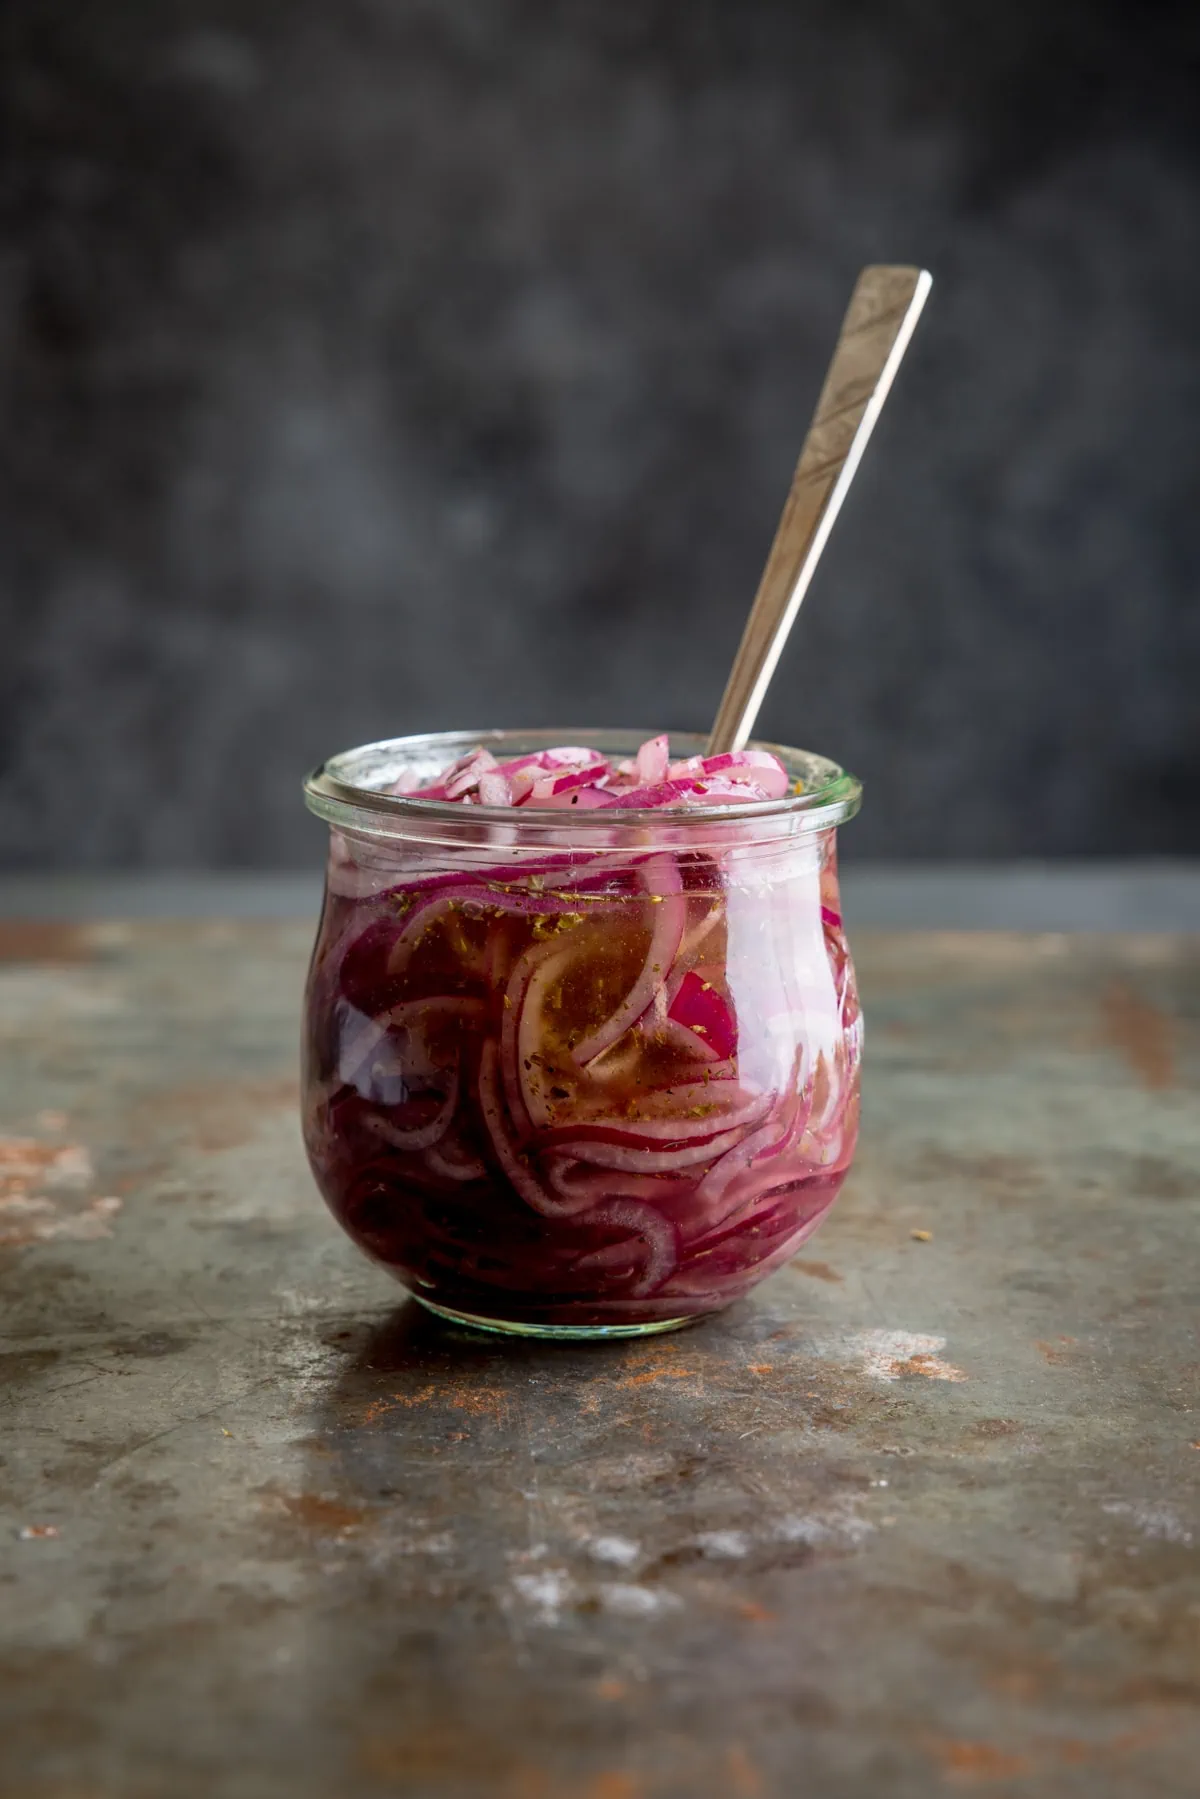 Side image of marinated sliced red onions in a glass jar with a metal spoon sticking out. The jar is on a vintage steel surface against a dark background.